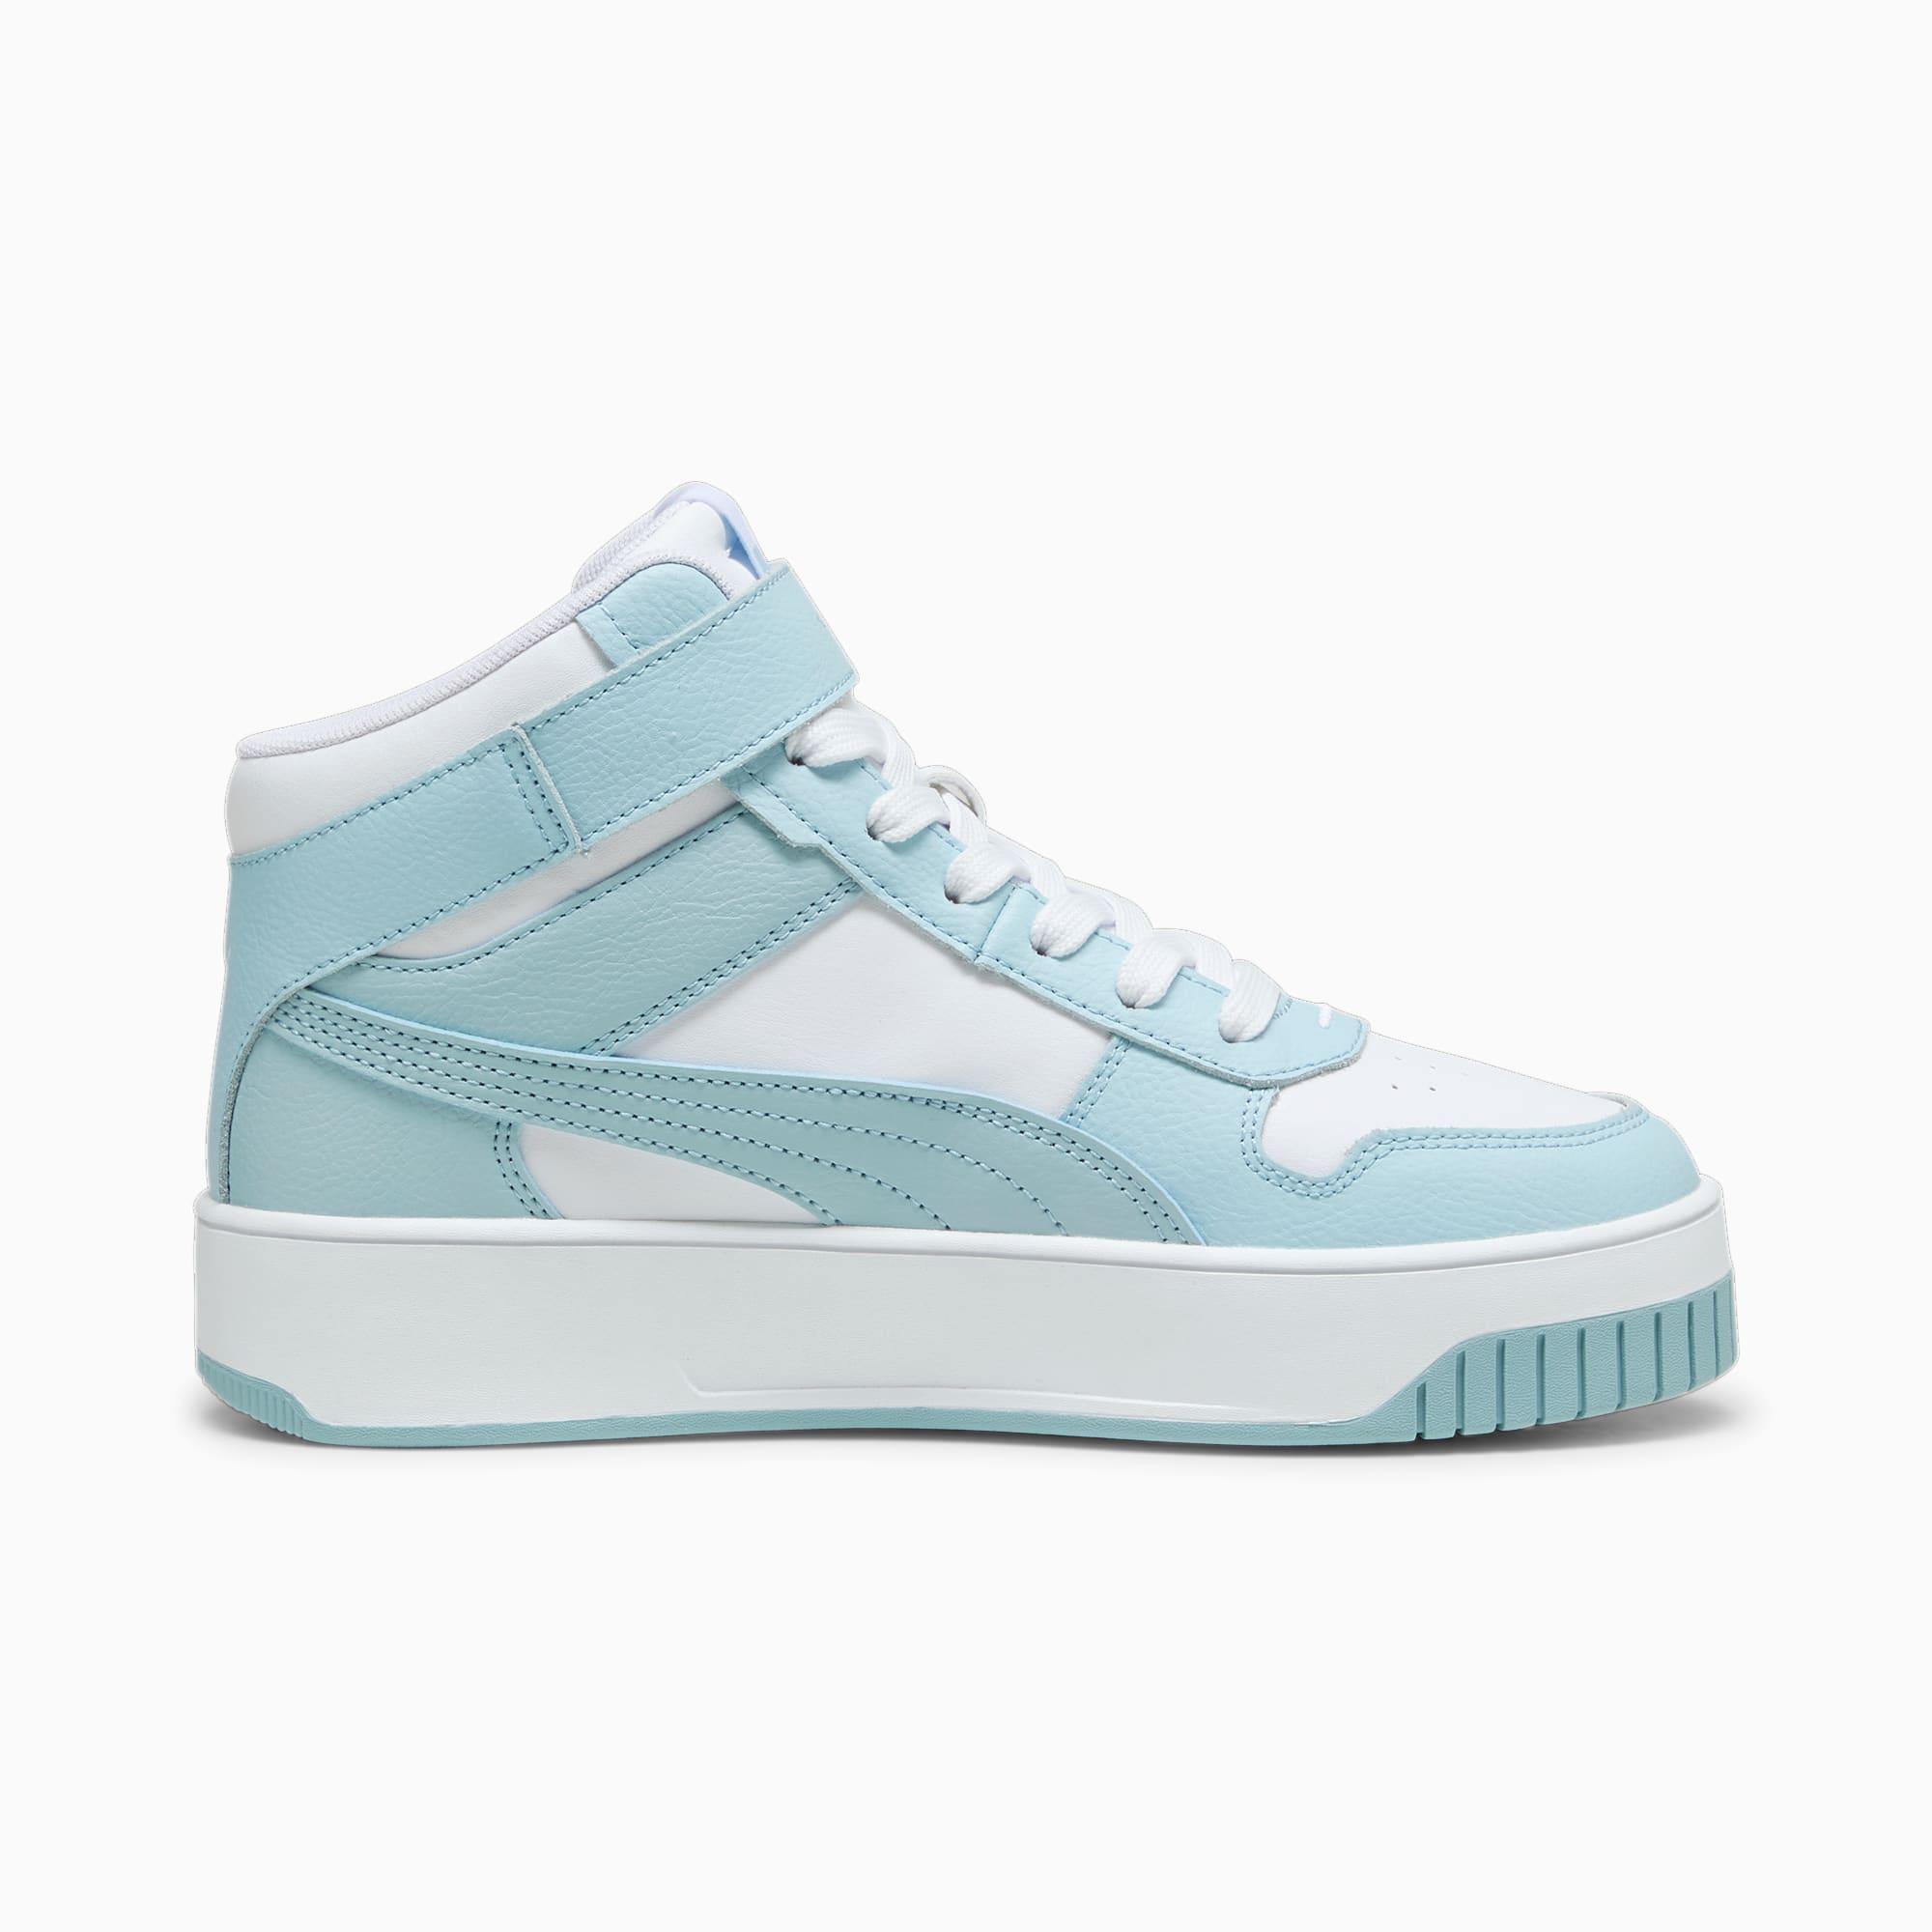 PUMA Carina Street Mid Women's Sneakers, White/Turquoise Surf, Size 38, Shoes